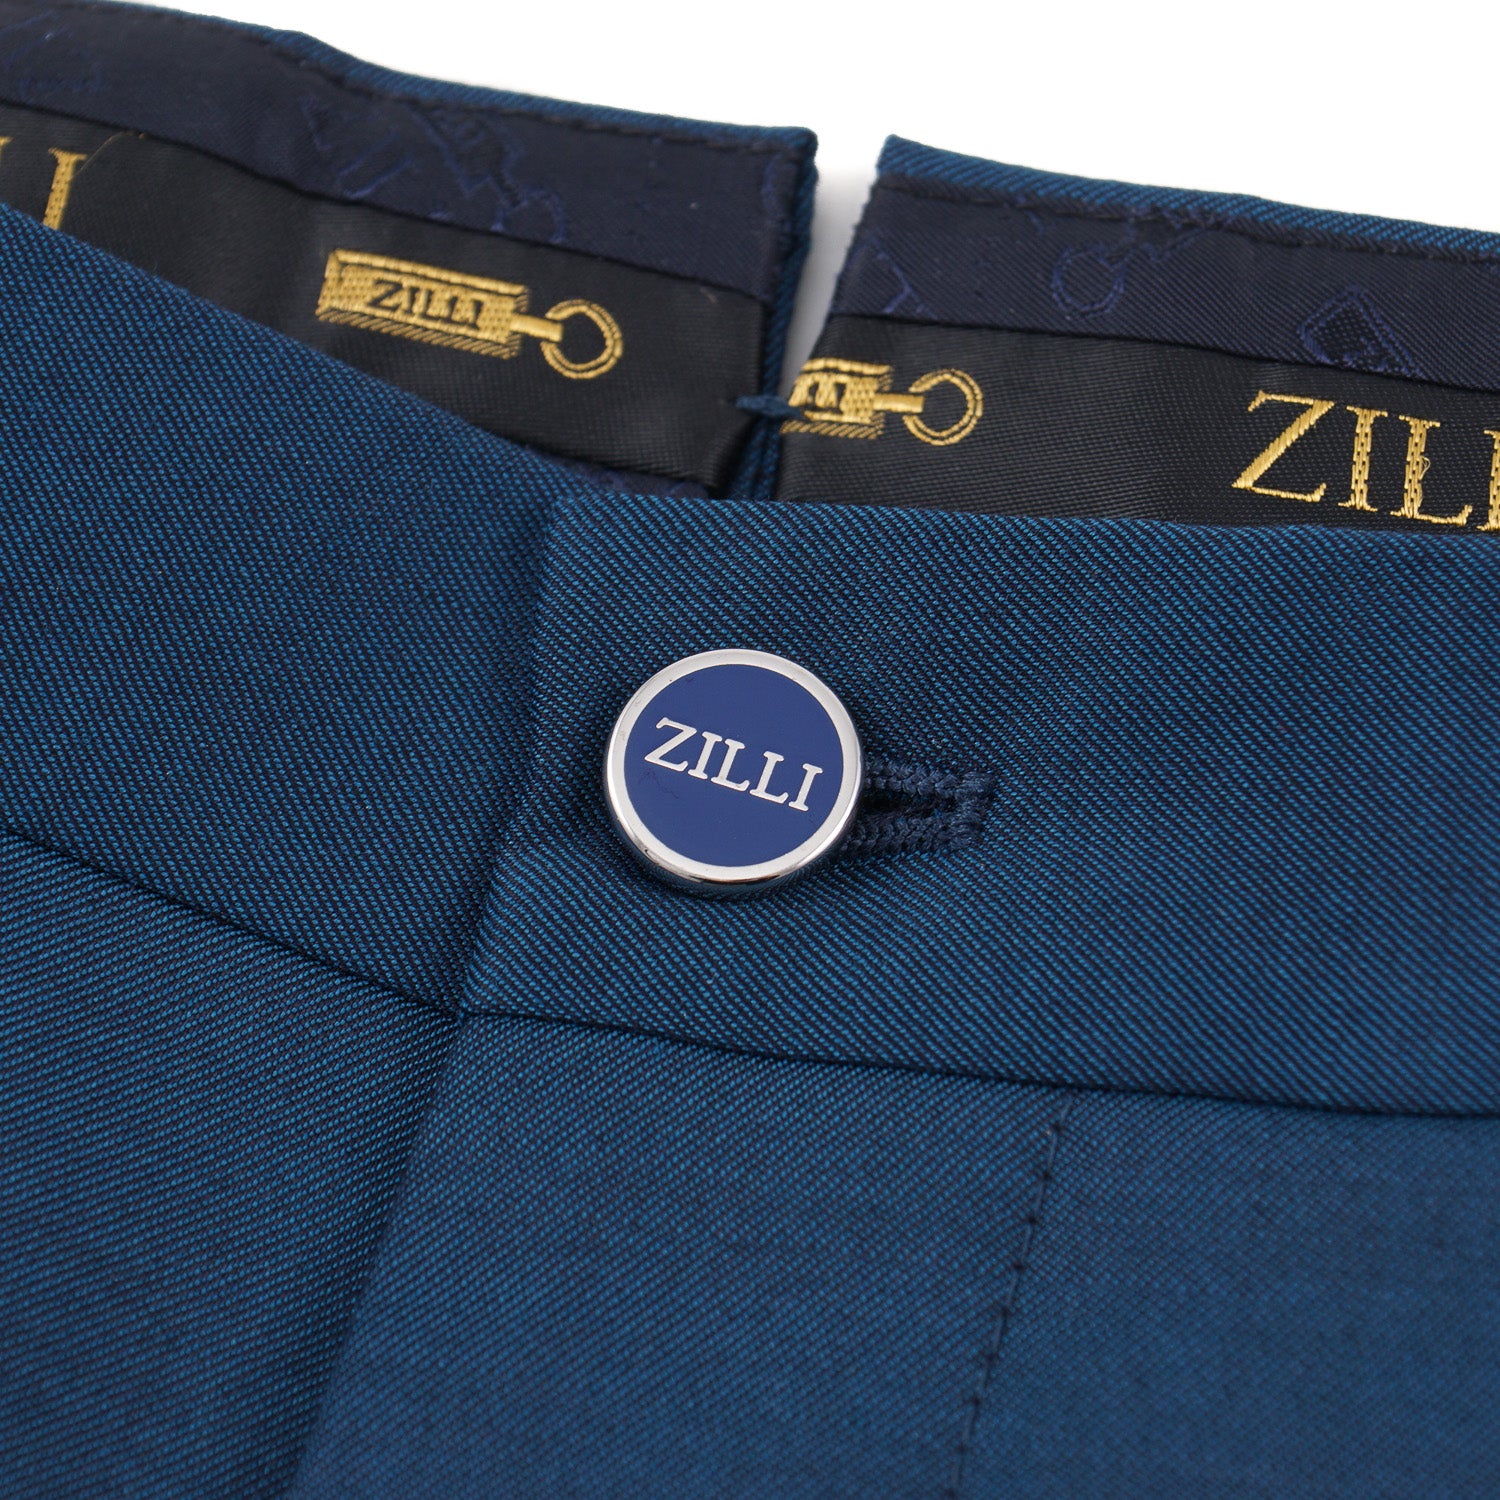 Zilli Slim-Fit Wool Pants with Leather Details - Top Shelf Apparel